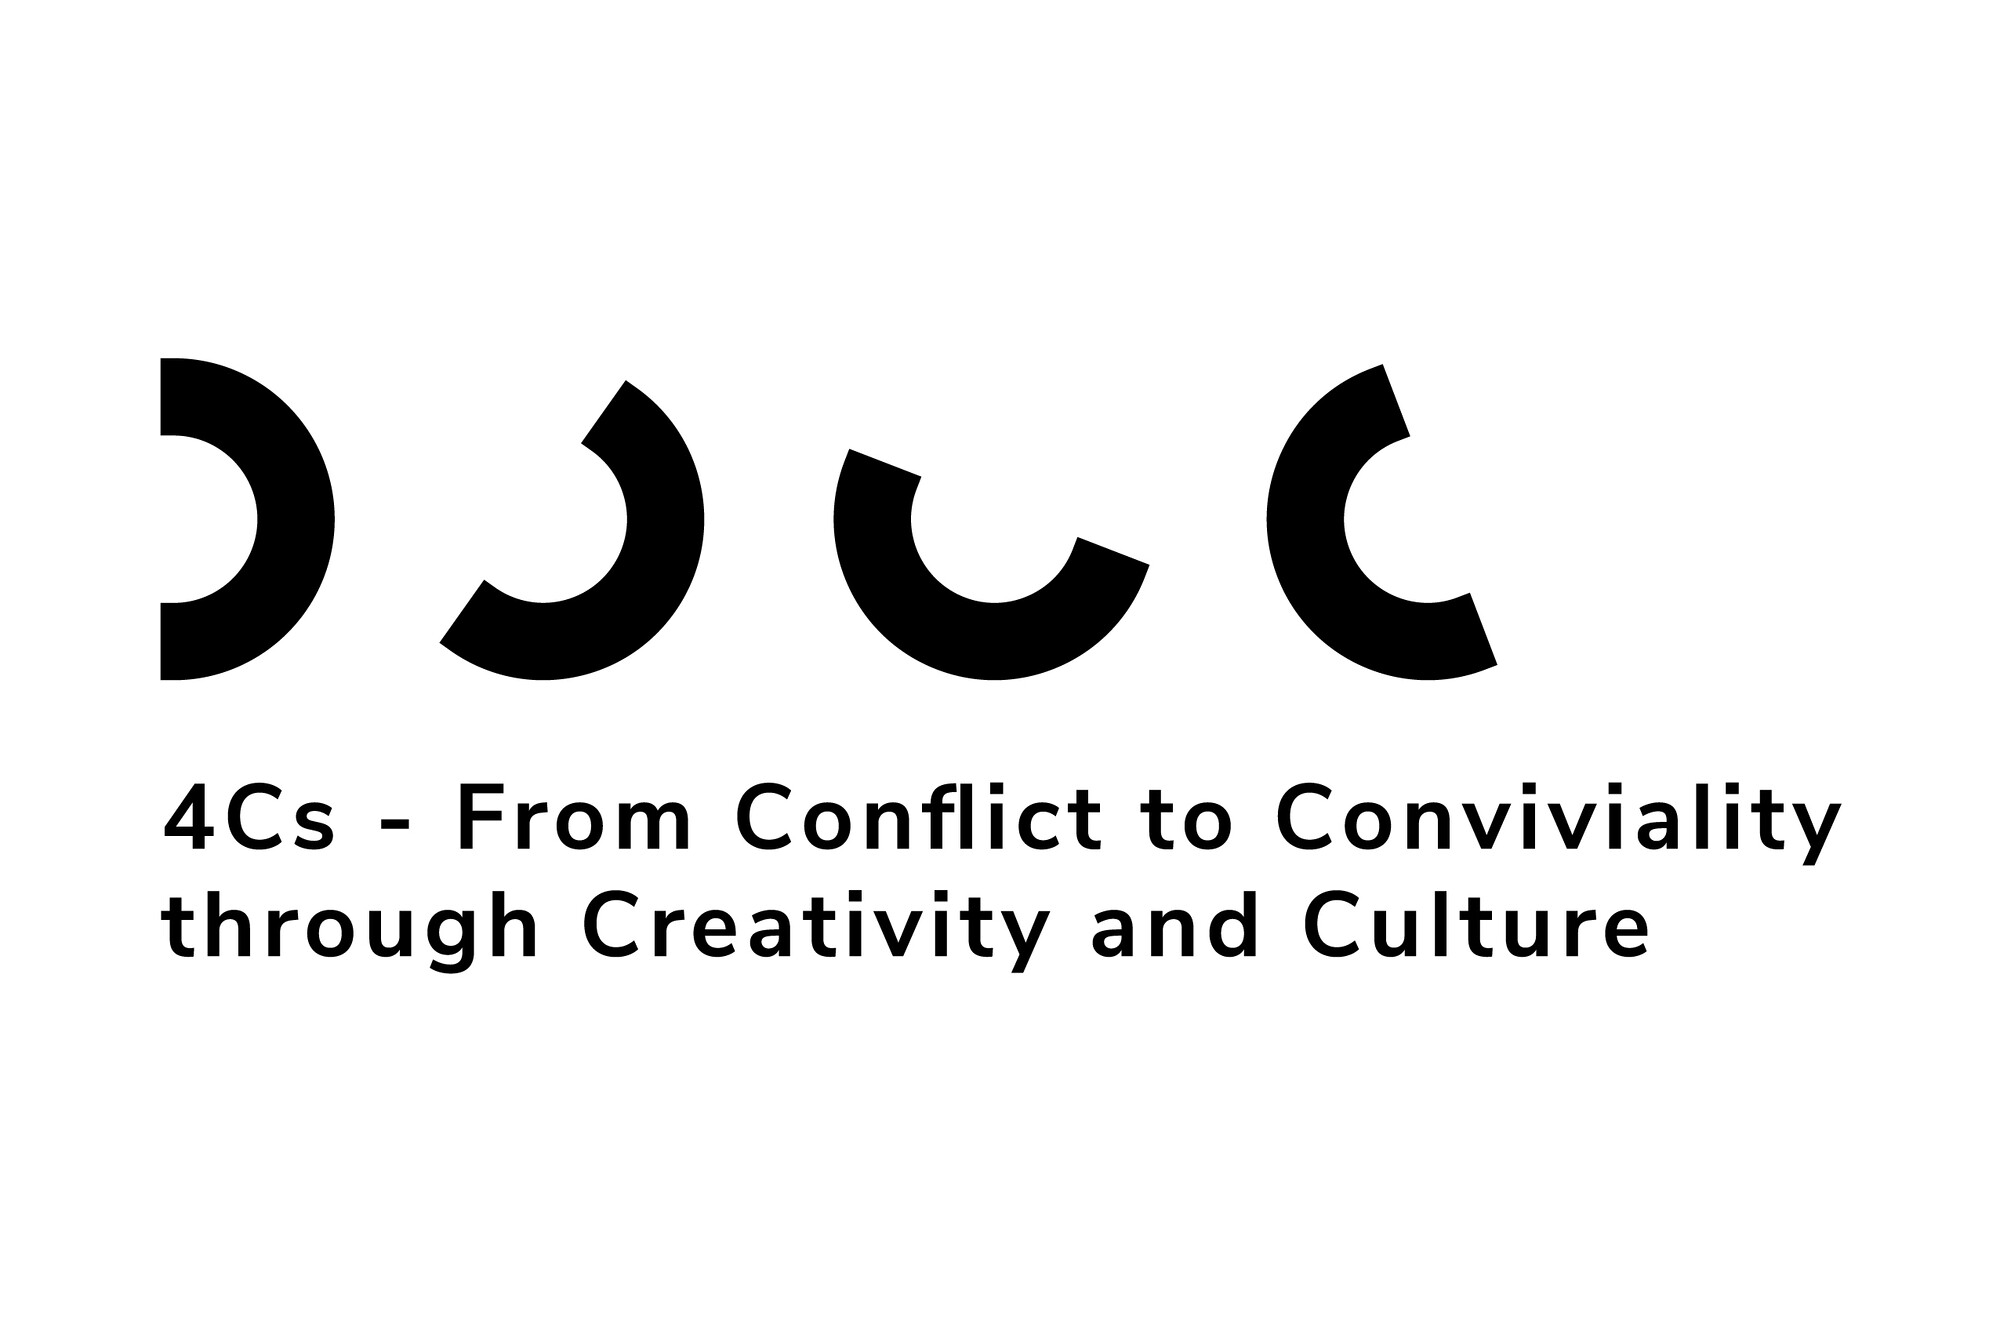 4Cs From Conflict to Conviviality through Creativity and Culture